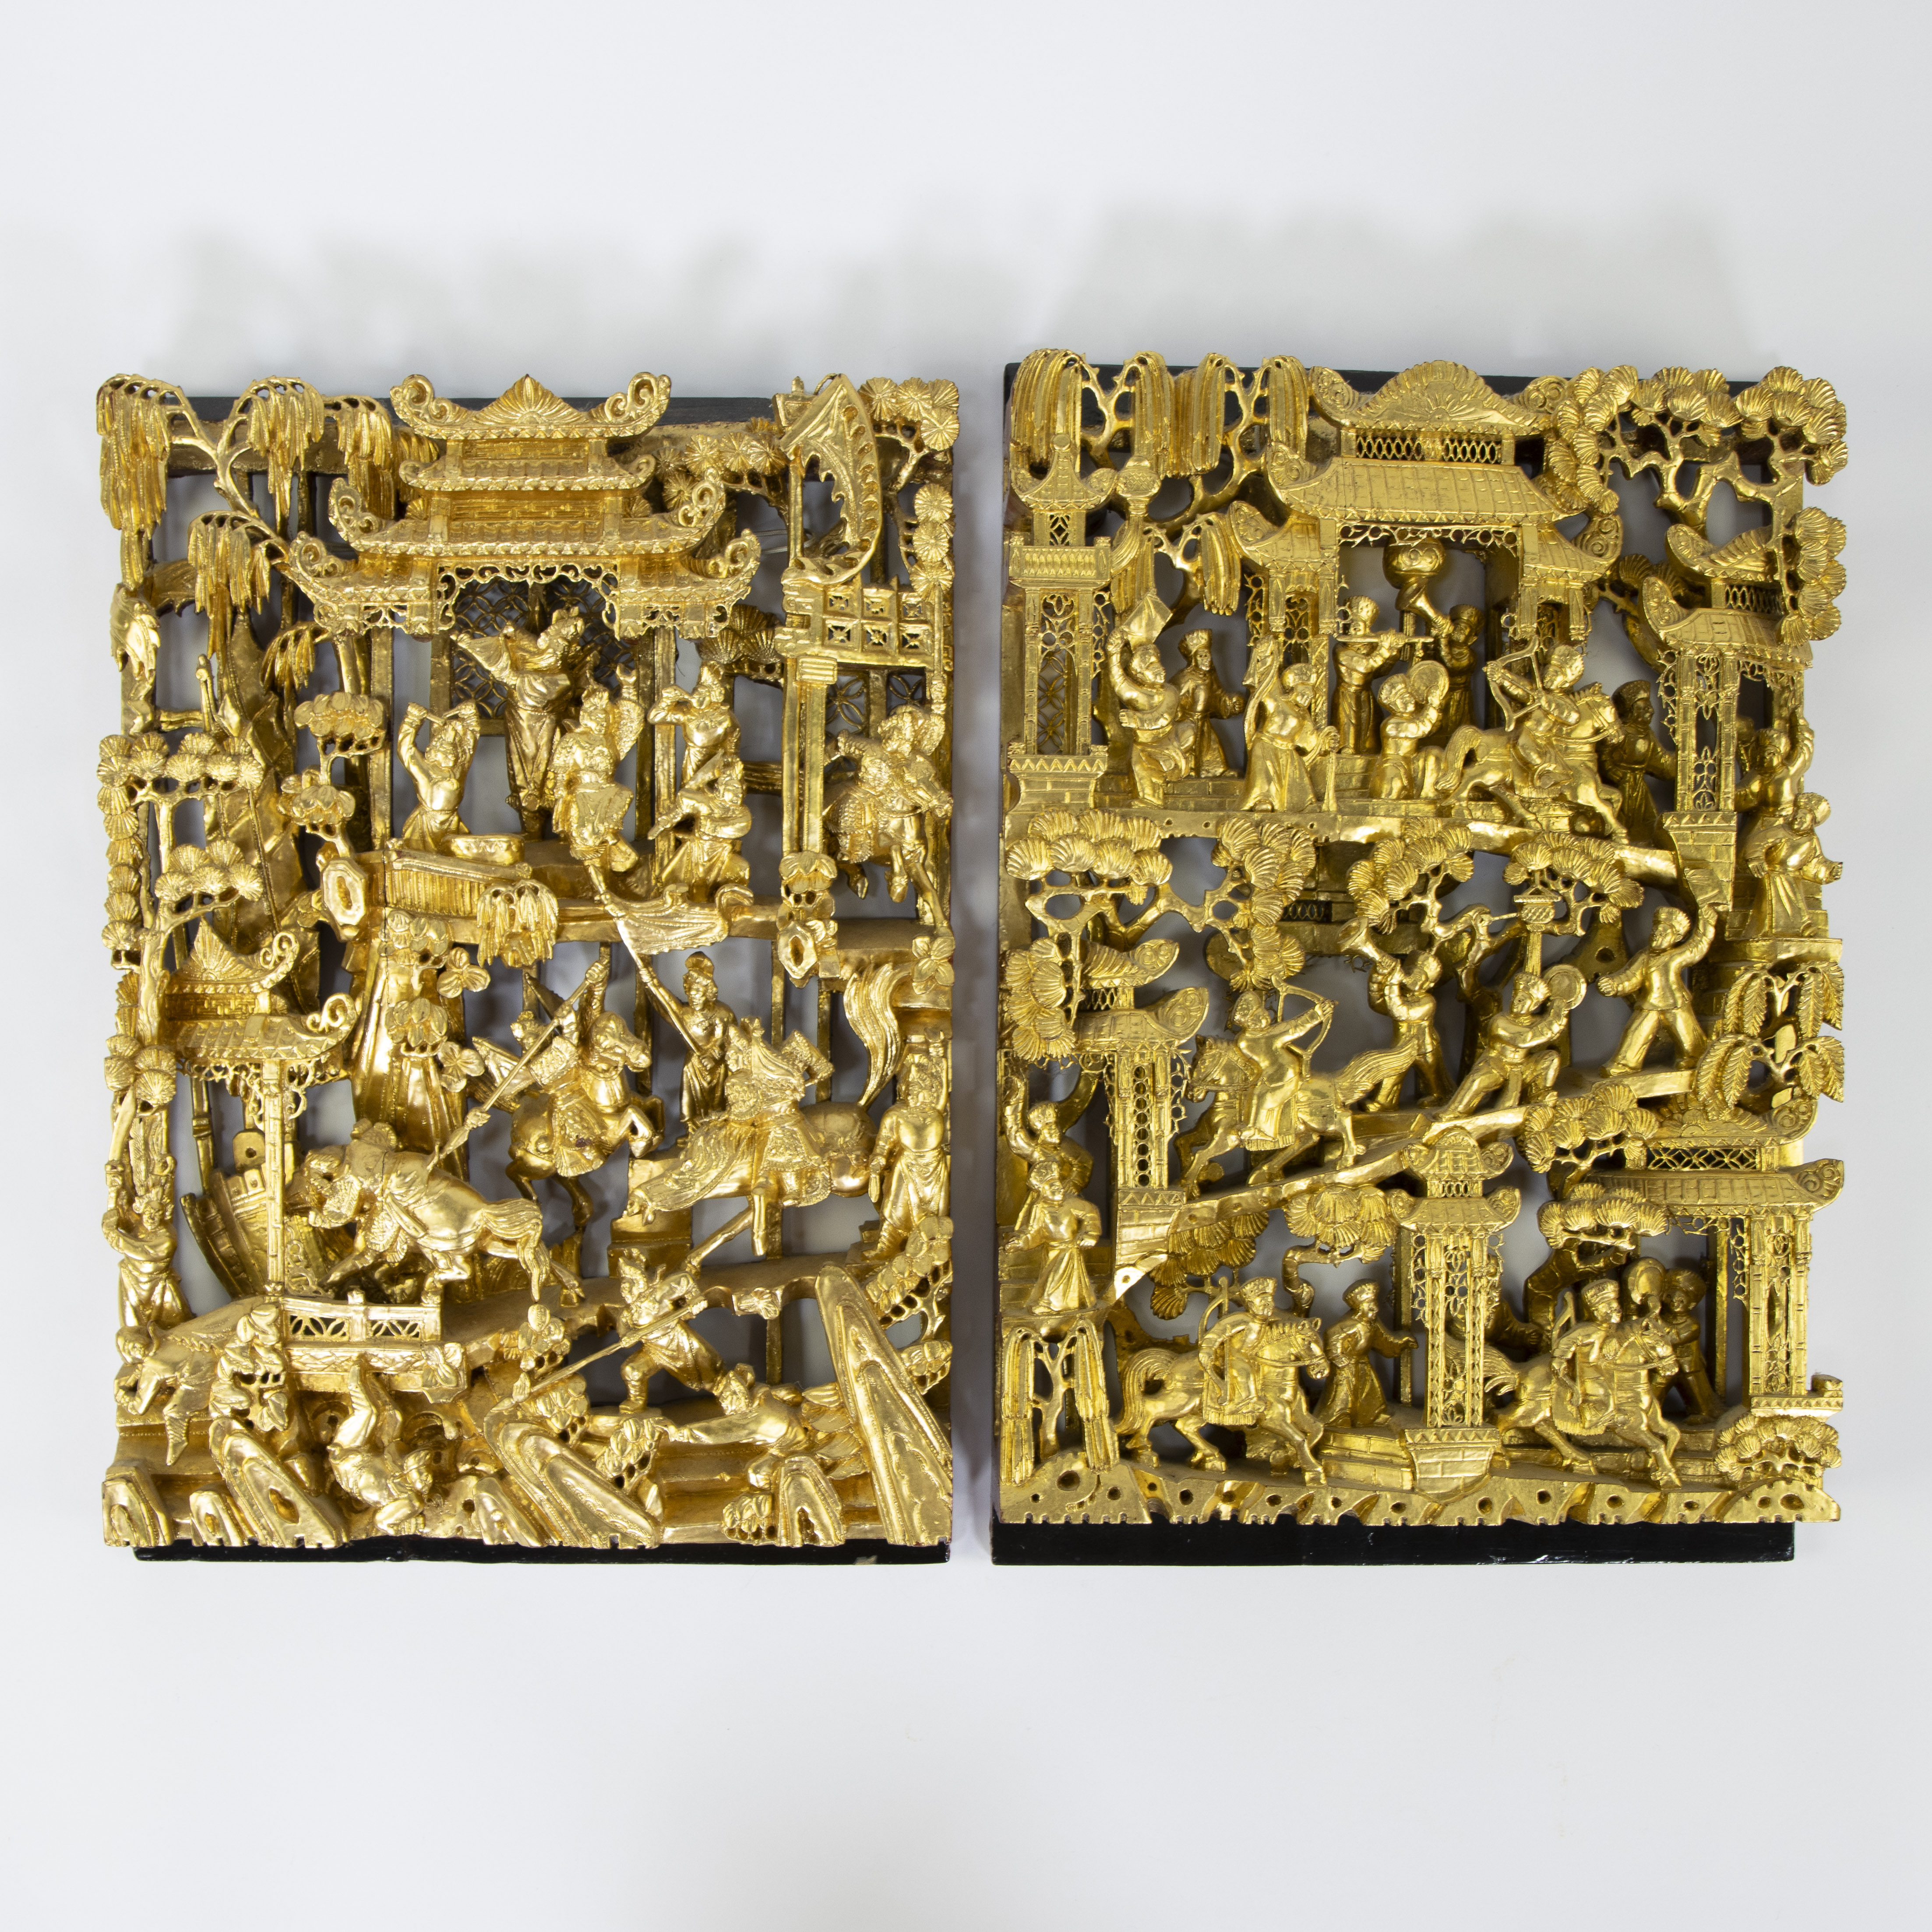 2 Chinese sculpted gilt wood panels with a war scene, Ningbo, 19/20th century